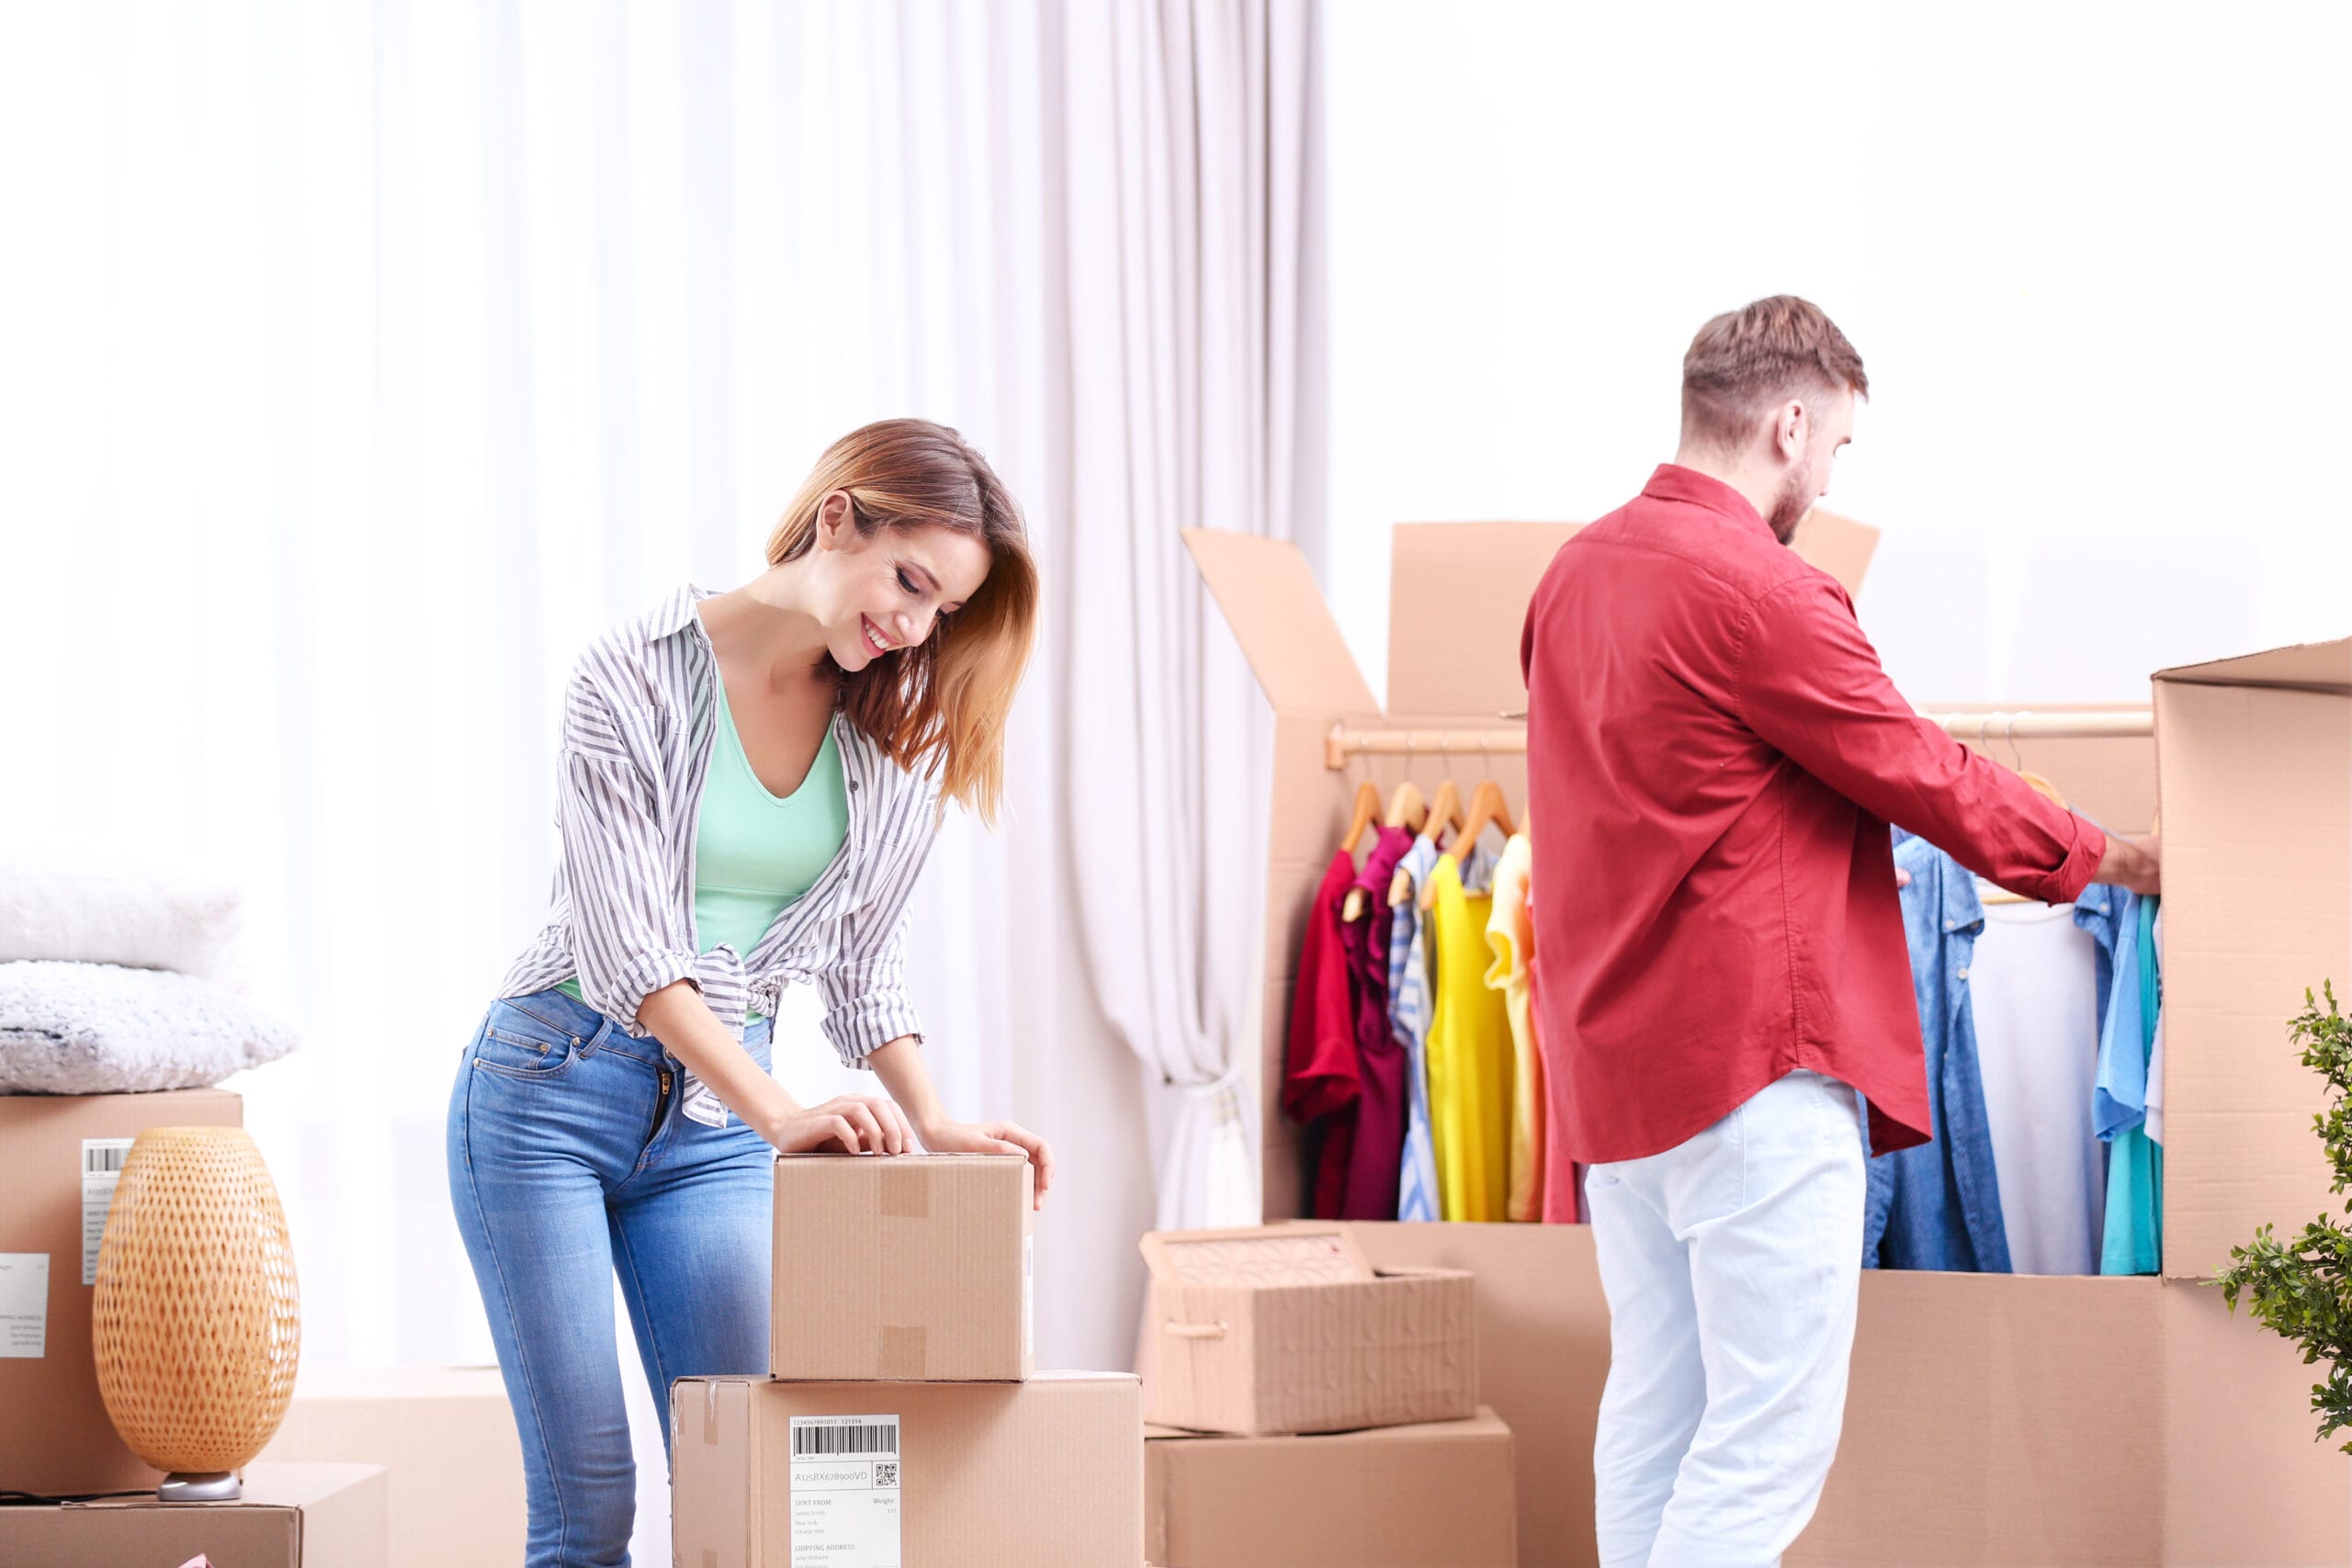 How to pack clothes for move